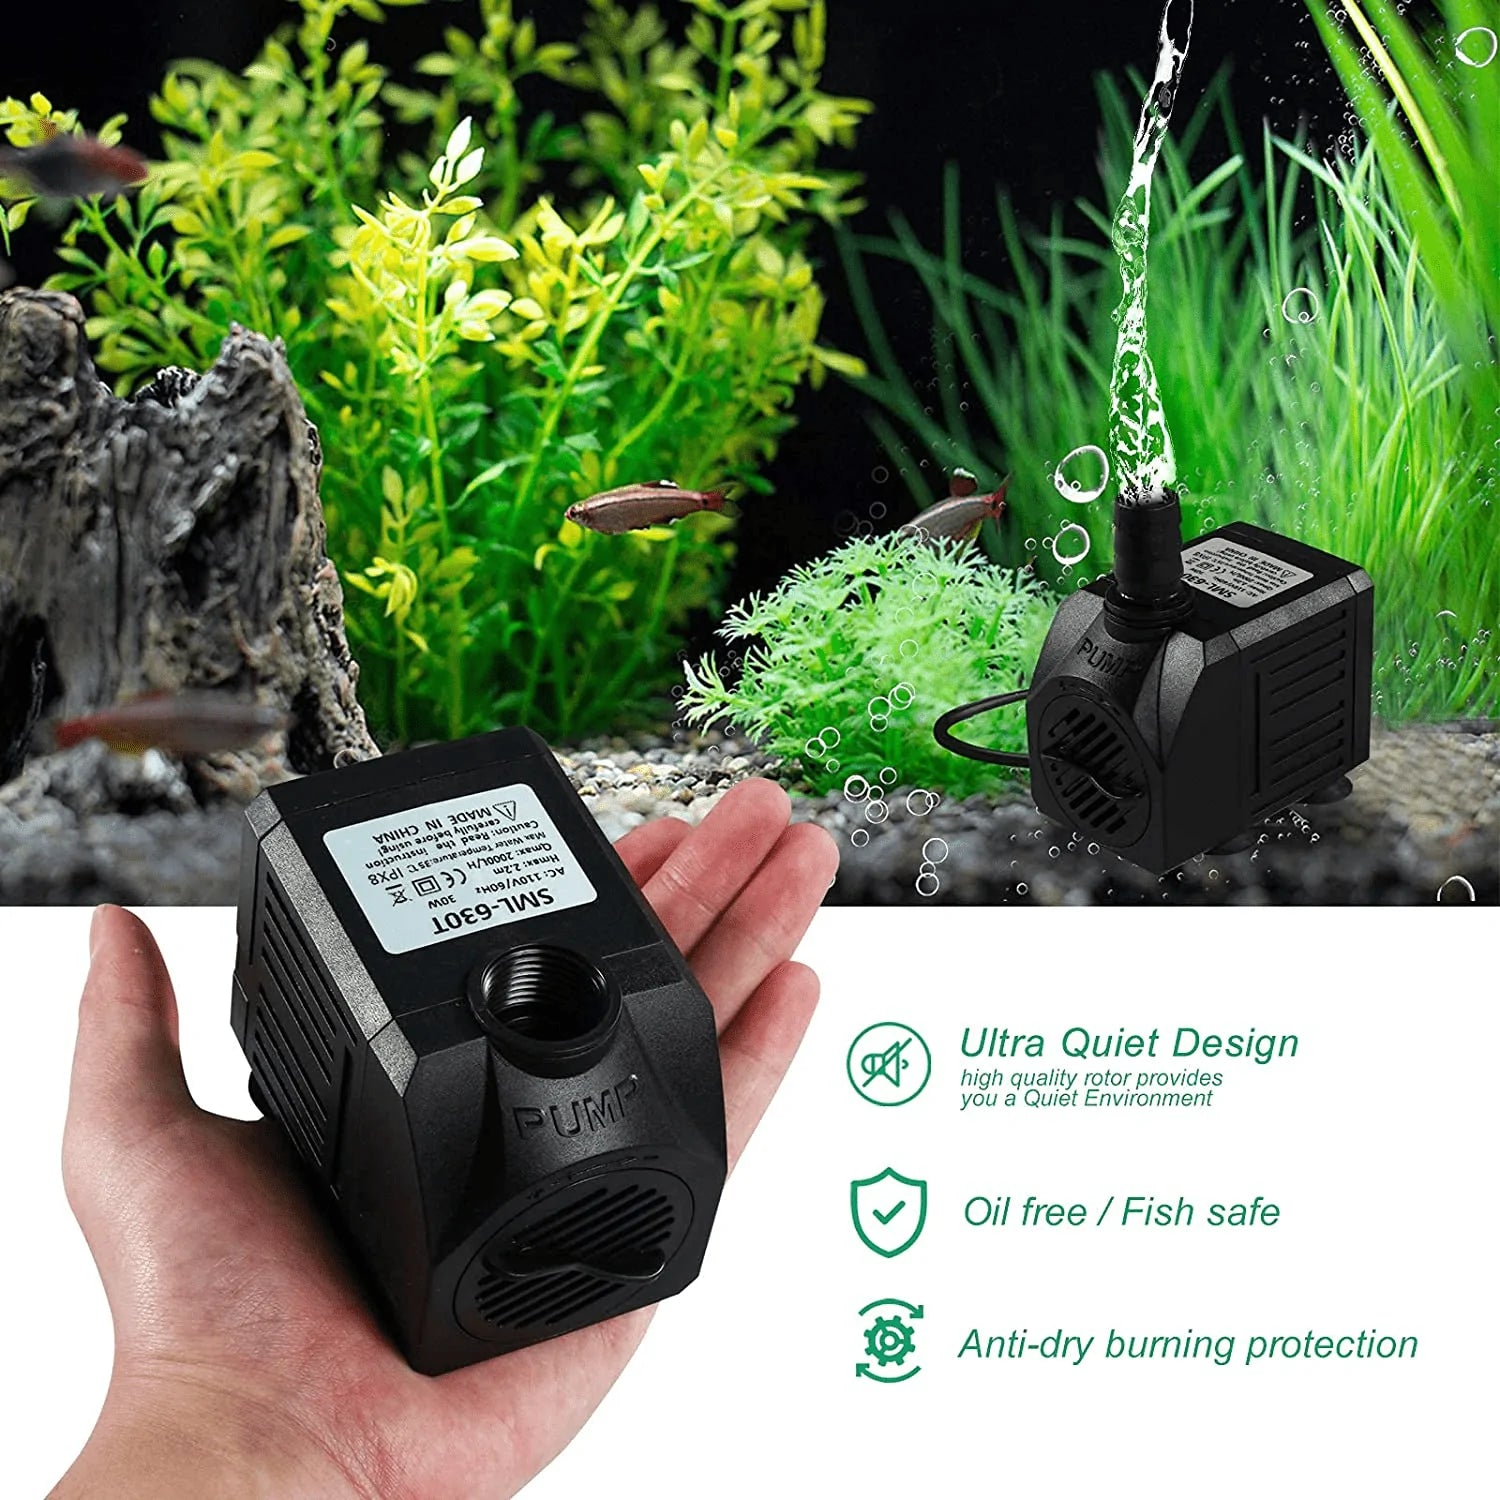 Fountain Pump, 520GPH Submersible Water Pump with Dry Burning Protection, 30W Small Fountain Pond Pump with 6.5Ft Tubing (1/2 Inch ID), 2000L/H, 3 Nozzles for Aquariums, Fish Tank, Hydroponics Animals & Pet Supplies > Pet Supplies > Fish Supplies > Aquarium & Pond Tubing AsFrost   